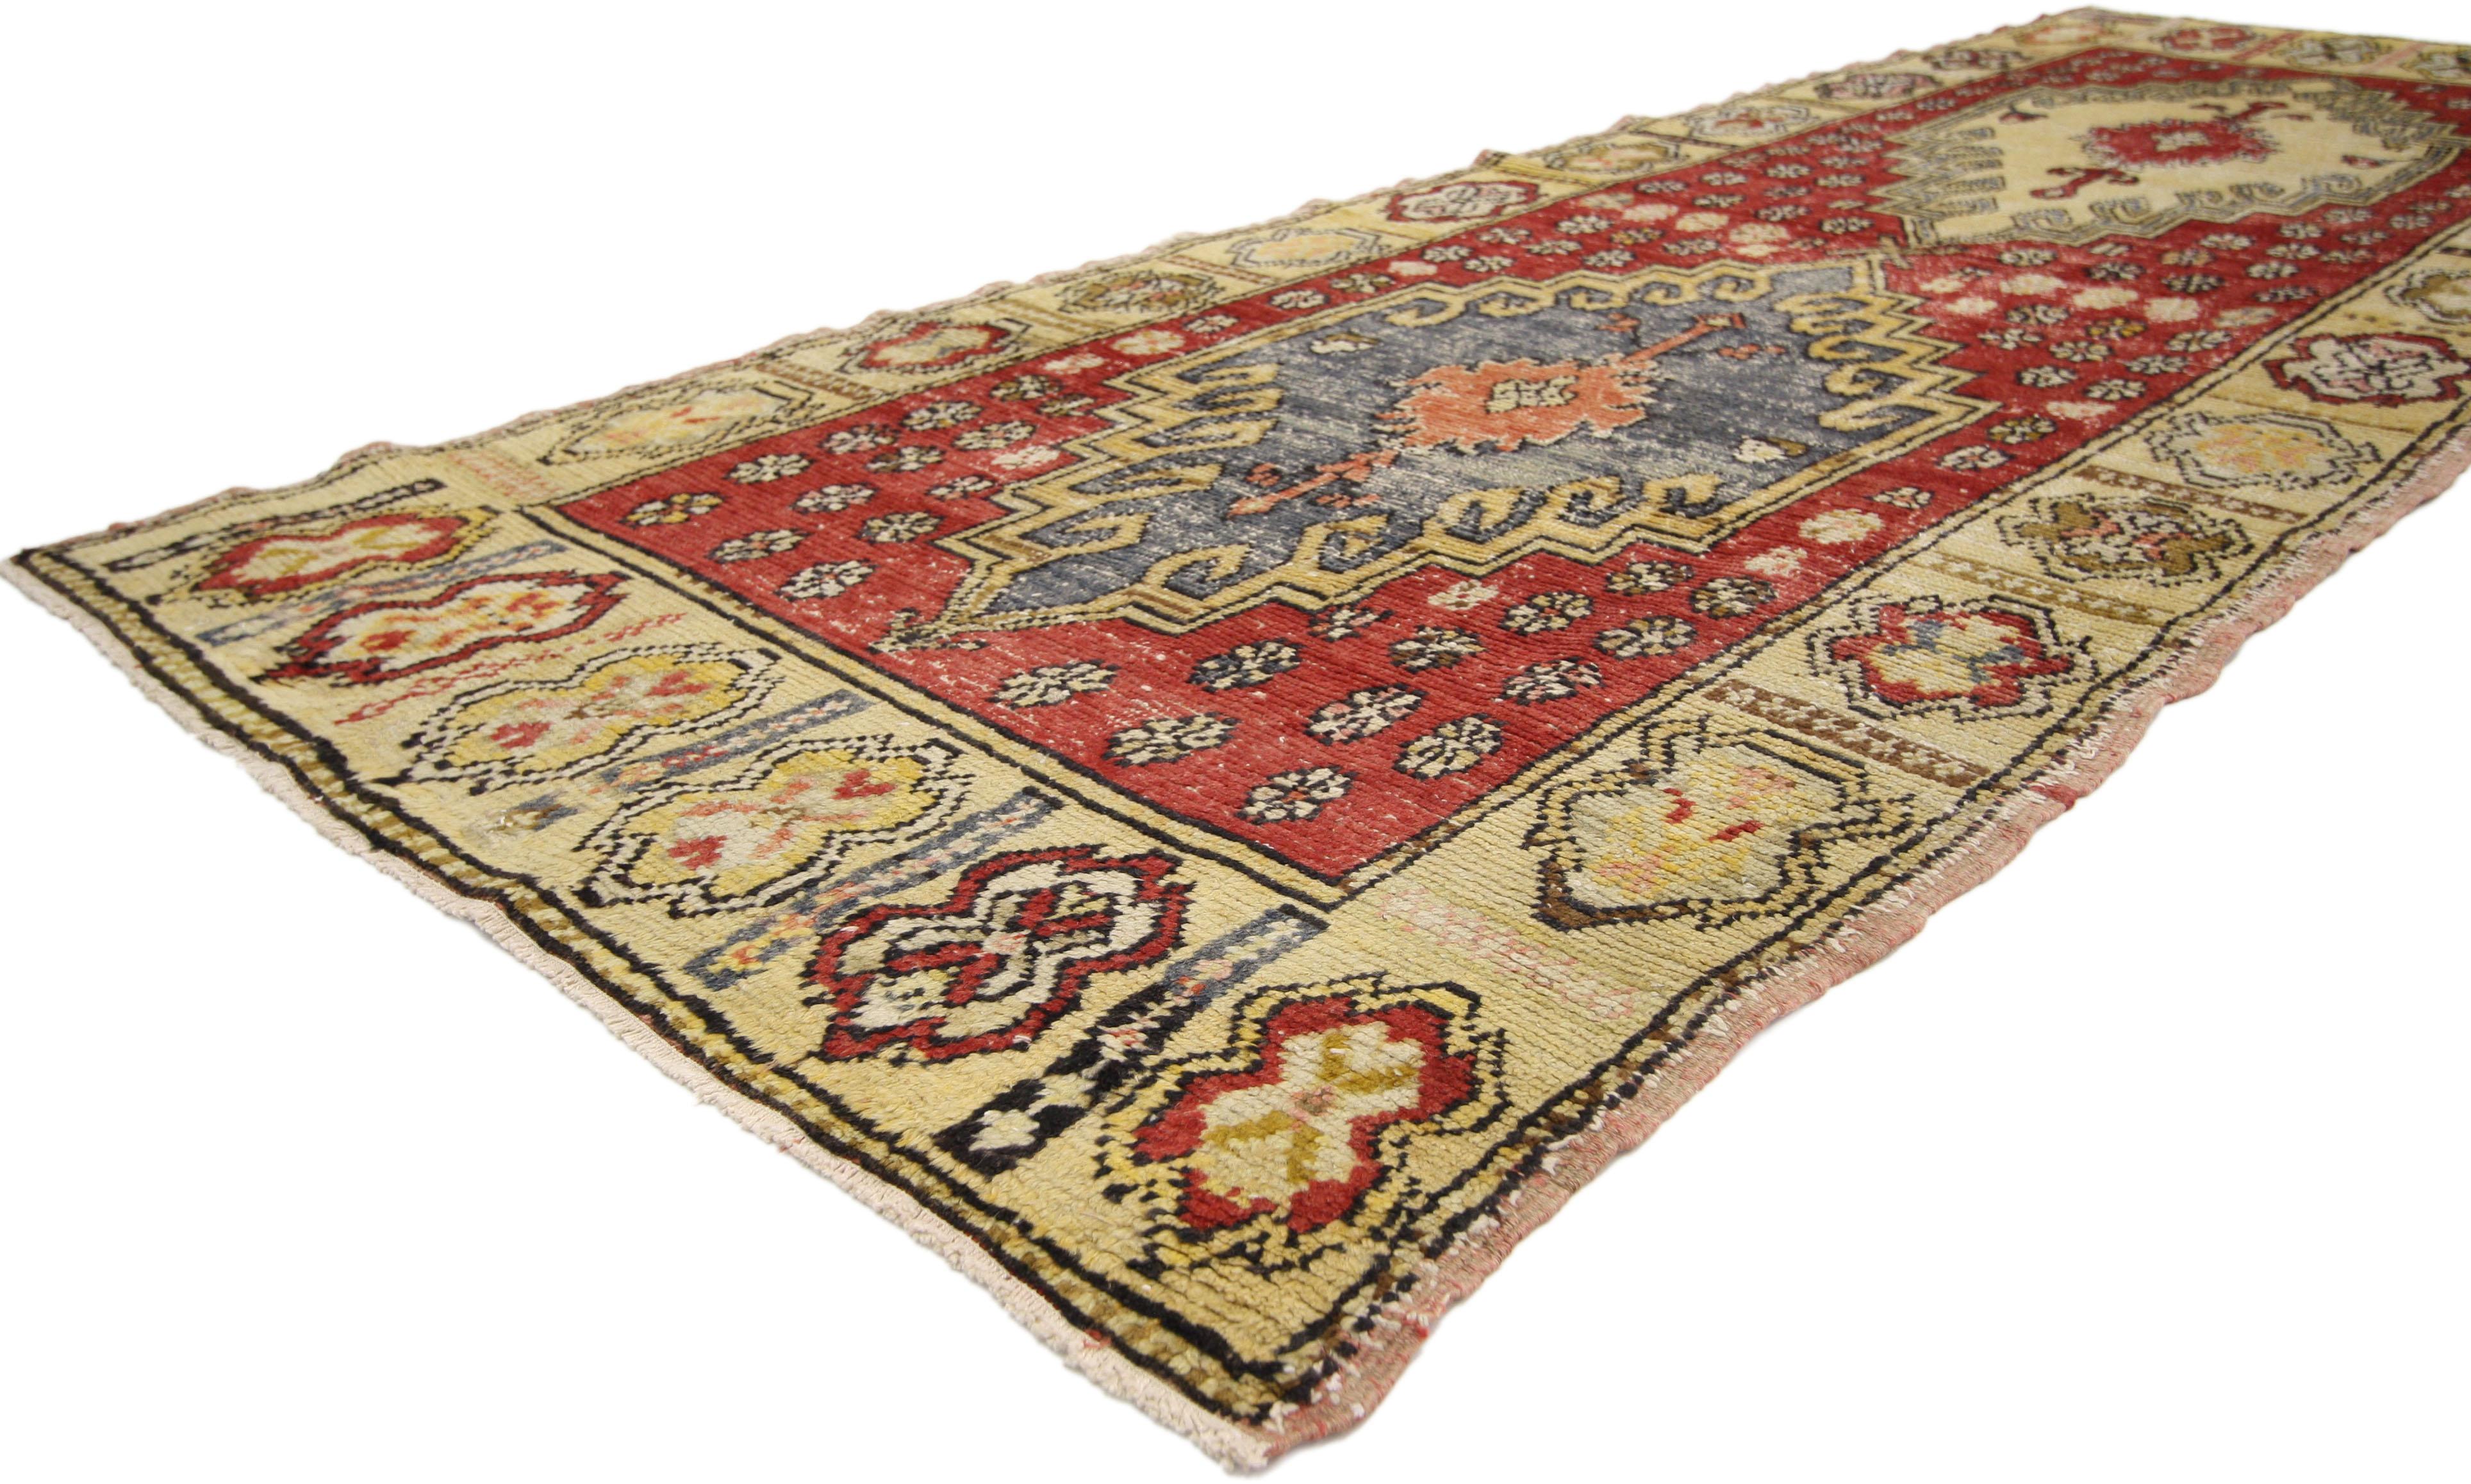 50317, distressed vintage Turkish Oushak hallway runner with Arts & Crafts style. This hand knotted wool distressed vintage Turkish Oushak runner features two stepped hexagonal medallions floating on an abrashed red field. The medallions each